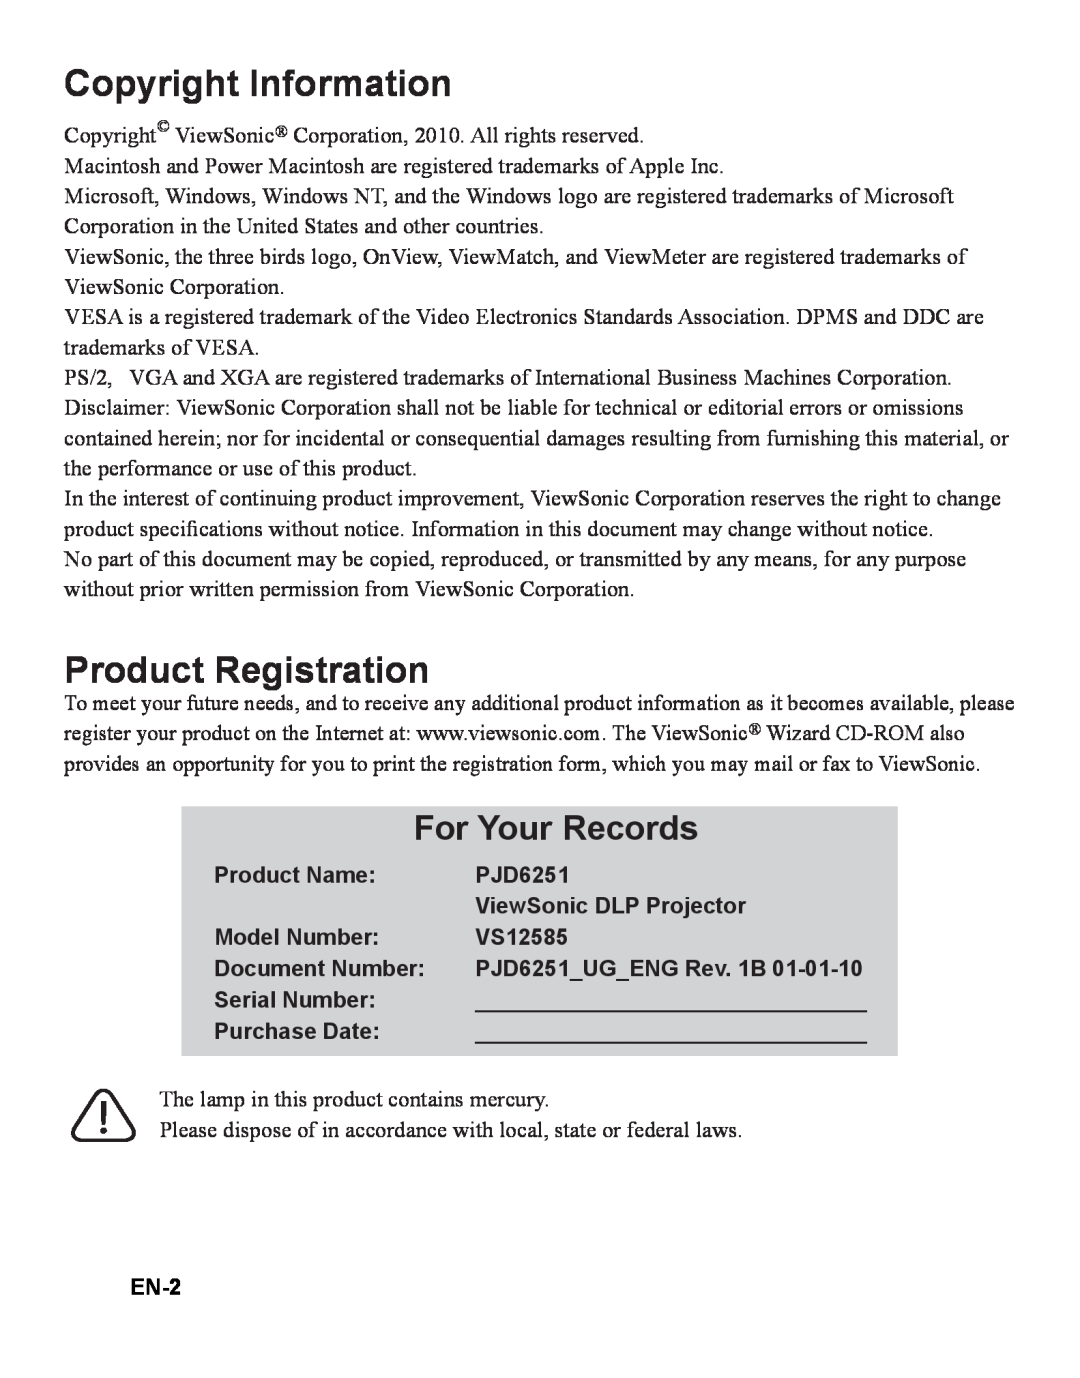 ViewSonic PJD6251 Copyright Information, Product Registration, For Your Records, Product Name, ViewSonic DLP Projector 